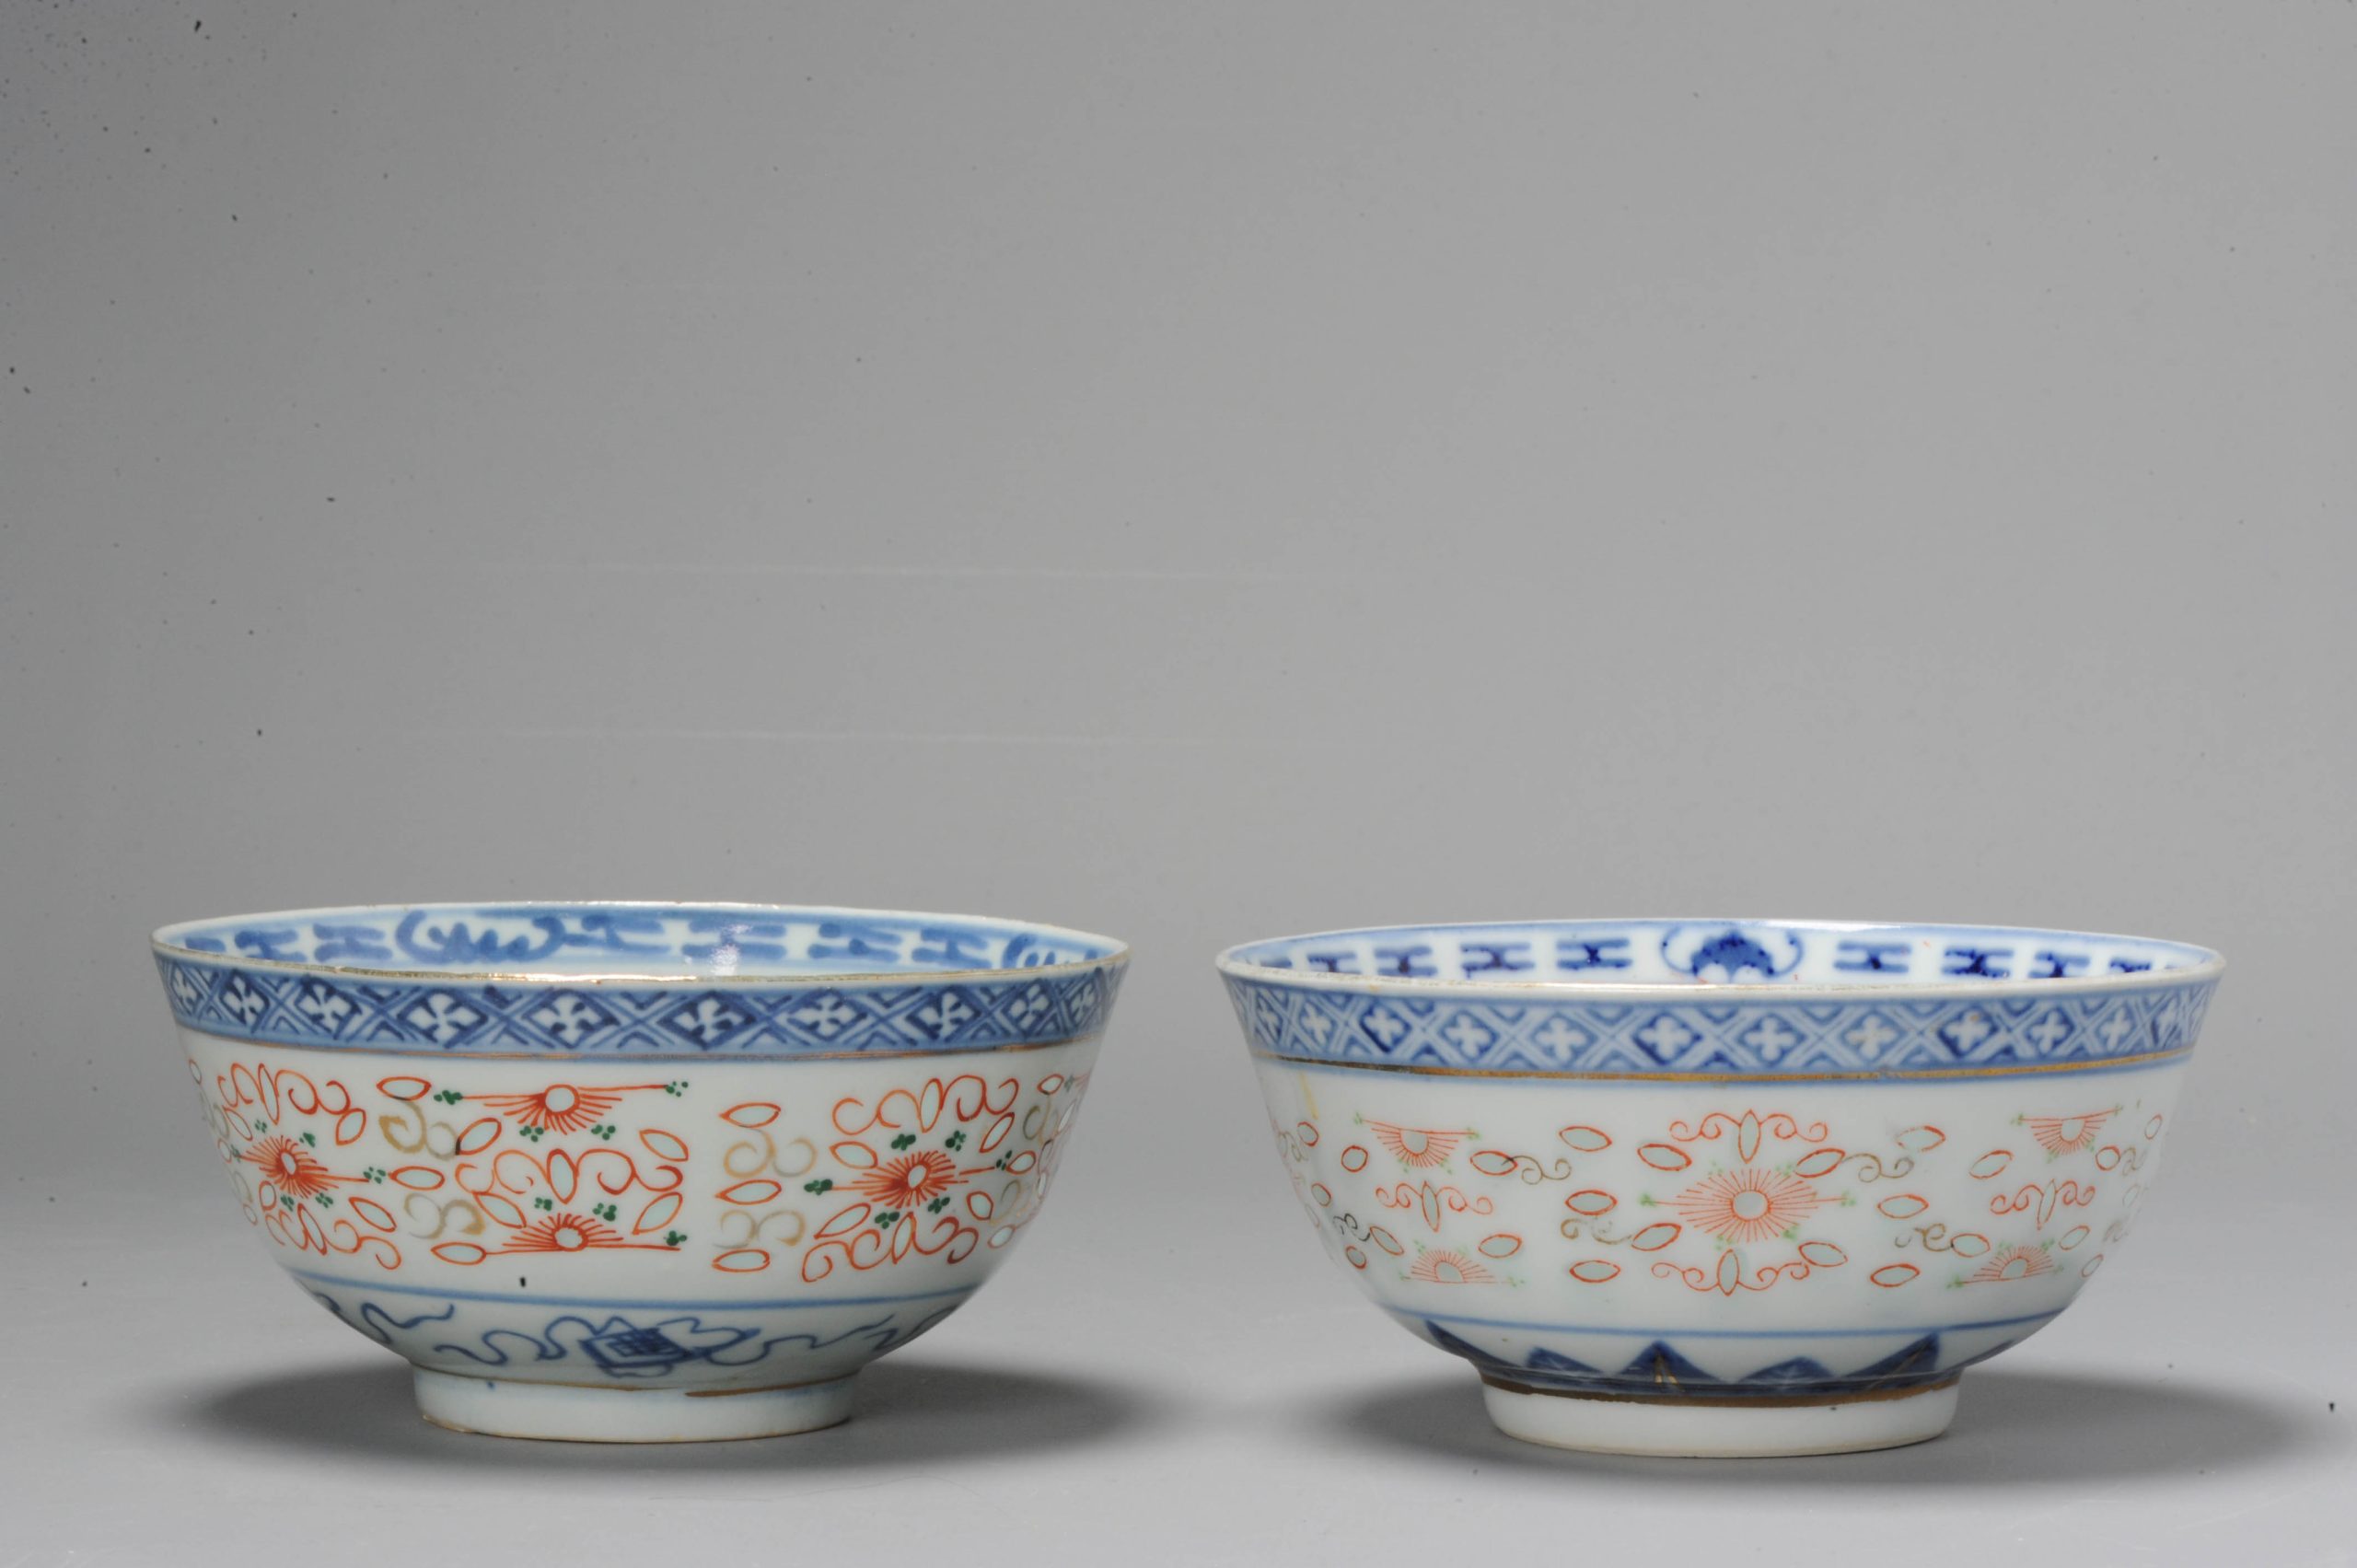 Antique Chinese Republic period Rice grain bowl with flowers, China 20th c.